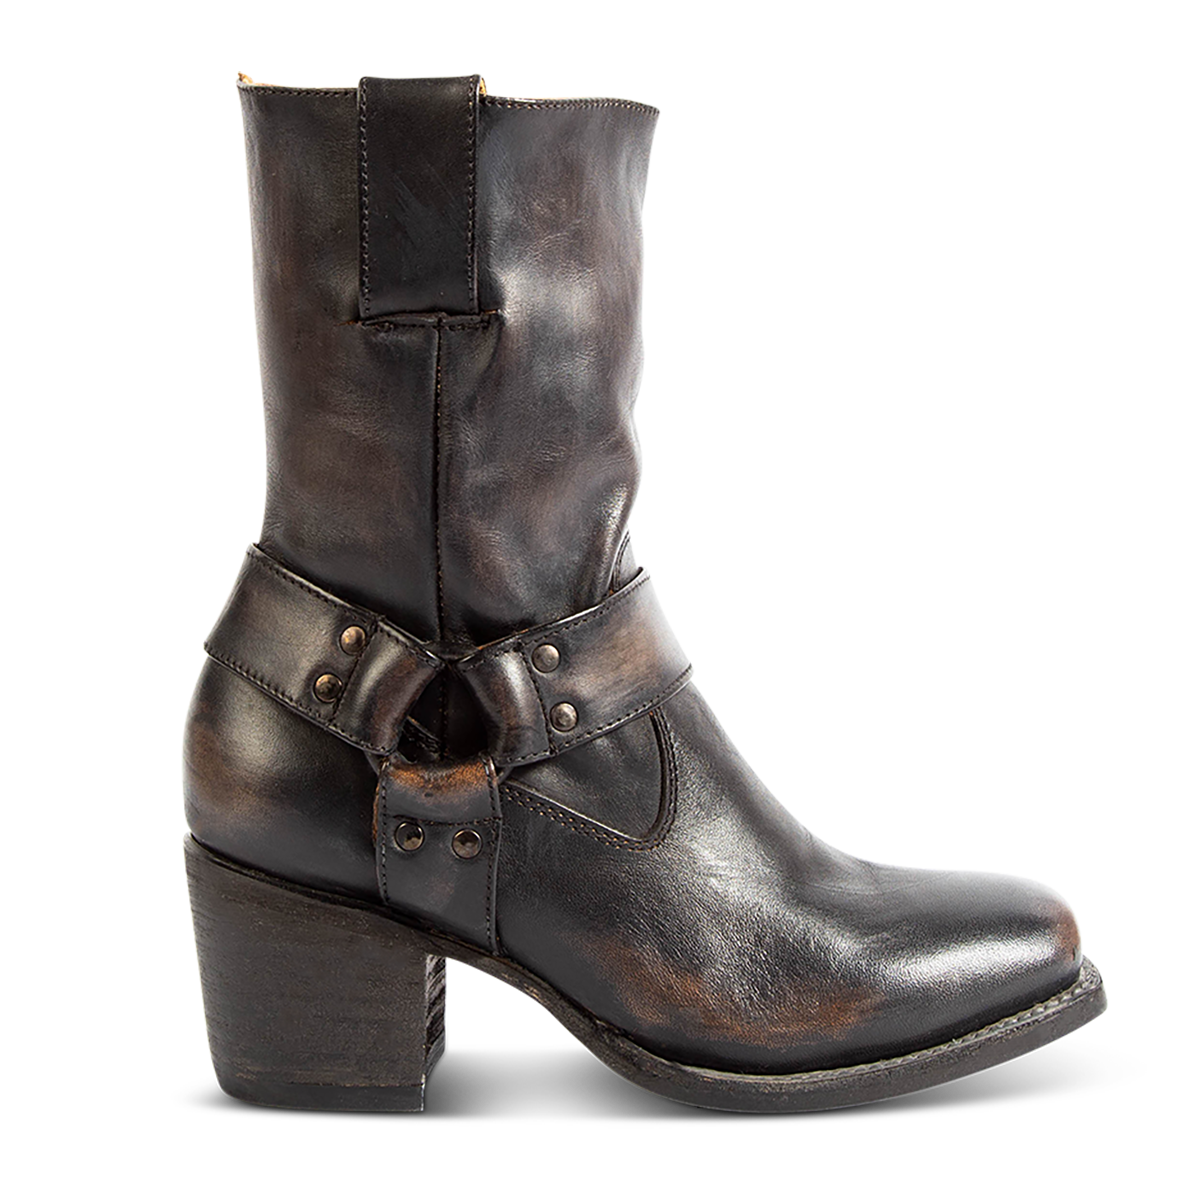 FREEBIRD women's Darcy black leather boot with a studded ankle harness, leather pull straps and a square toe